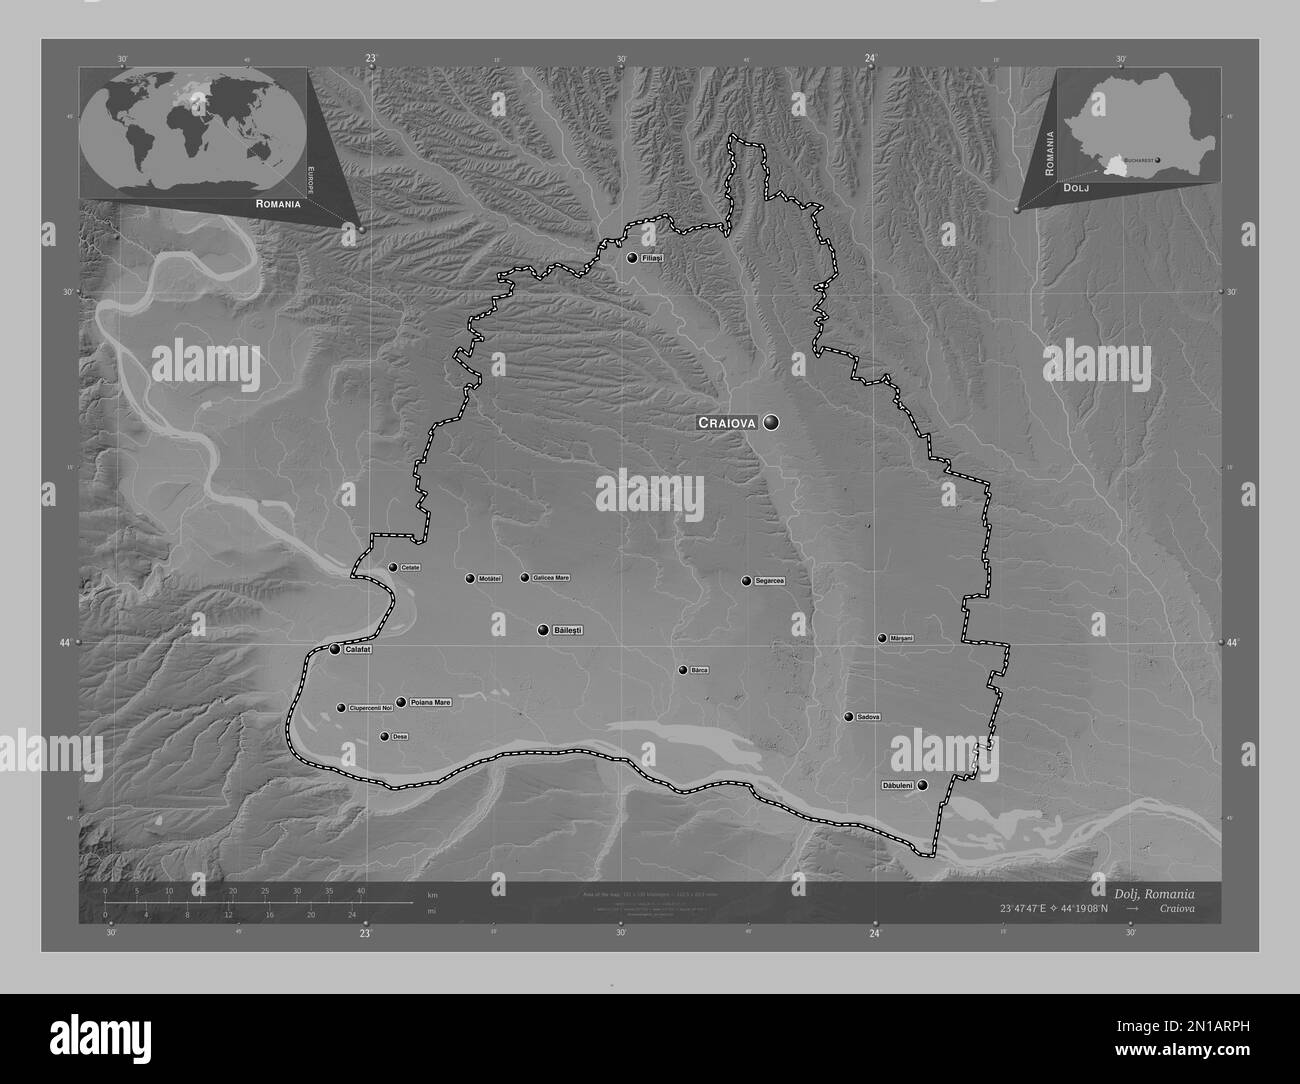 Dolj, county of Romania. Grayscale elevation map with lakes and rivers. Locations and names of major cities of the region. Corner auxiliary location m Stock Photo